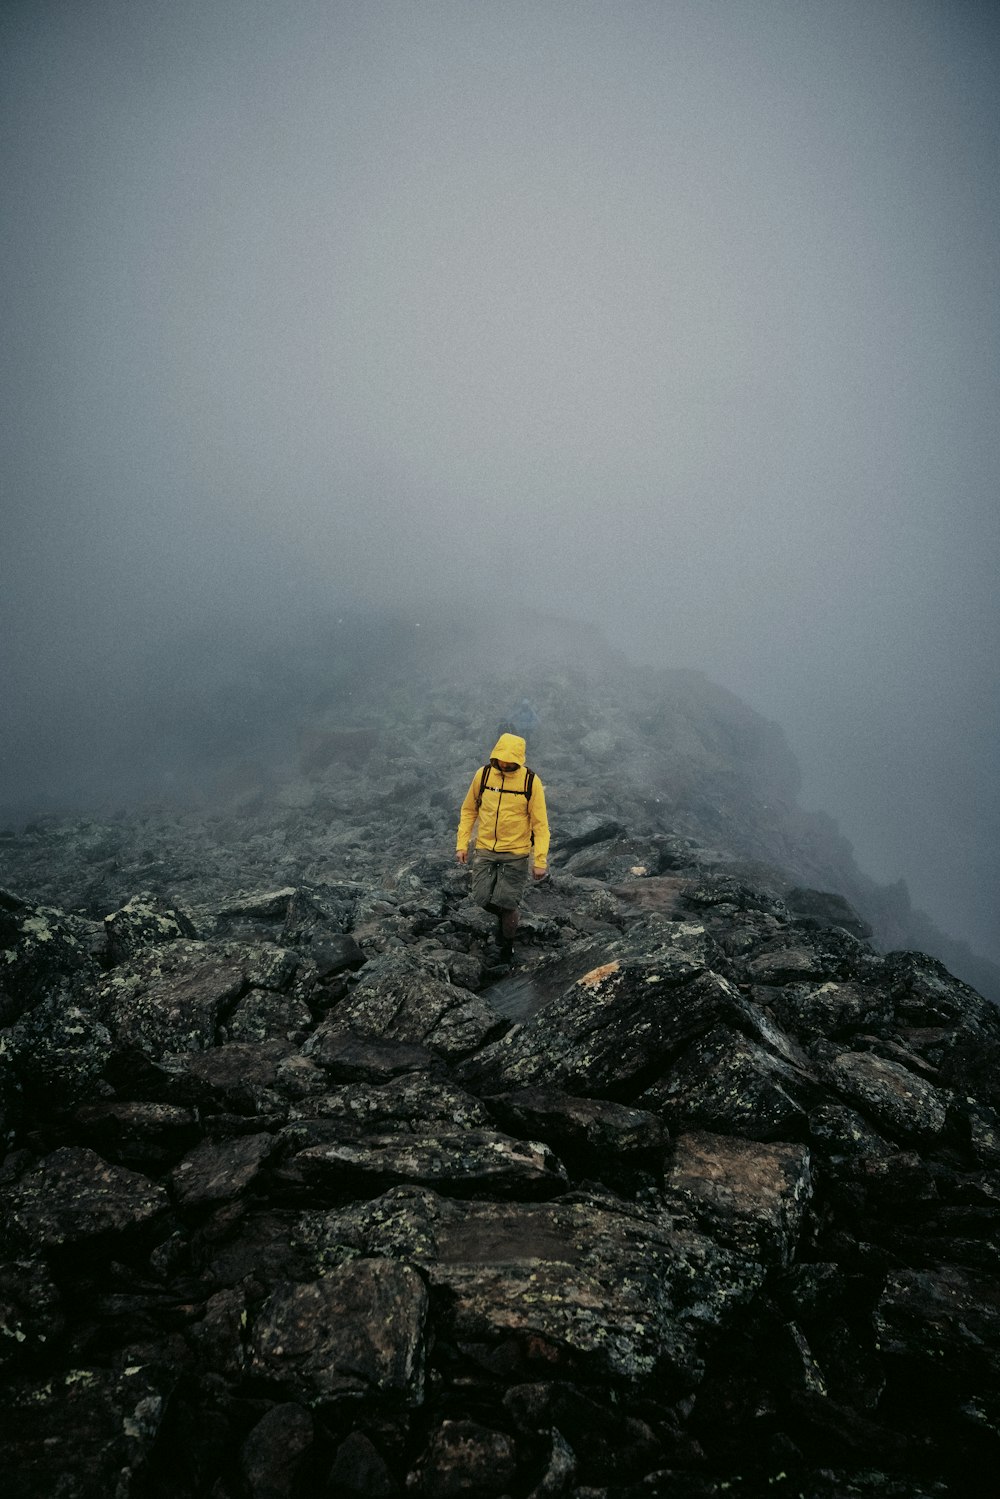 a person in a yellow jacket standing on a rocky mountain